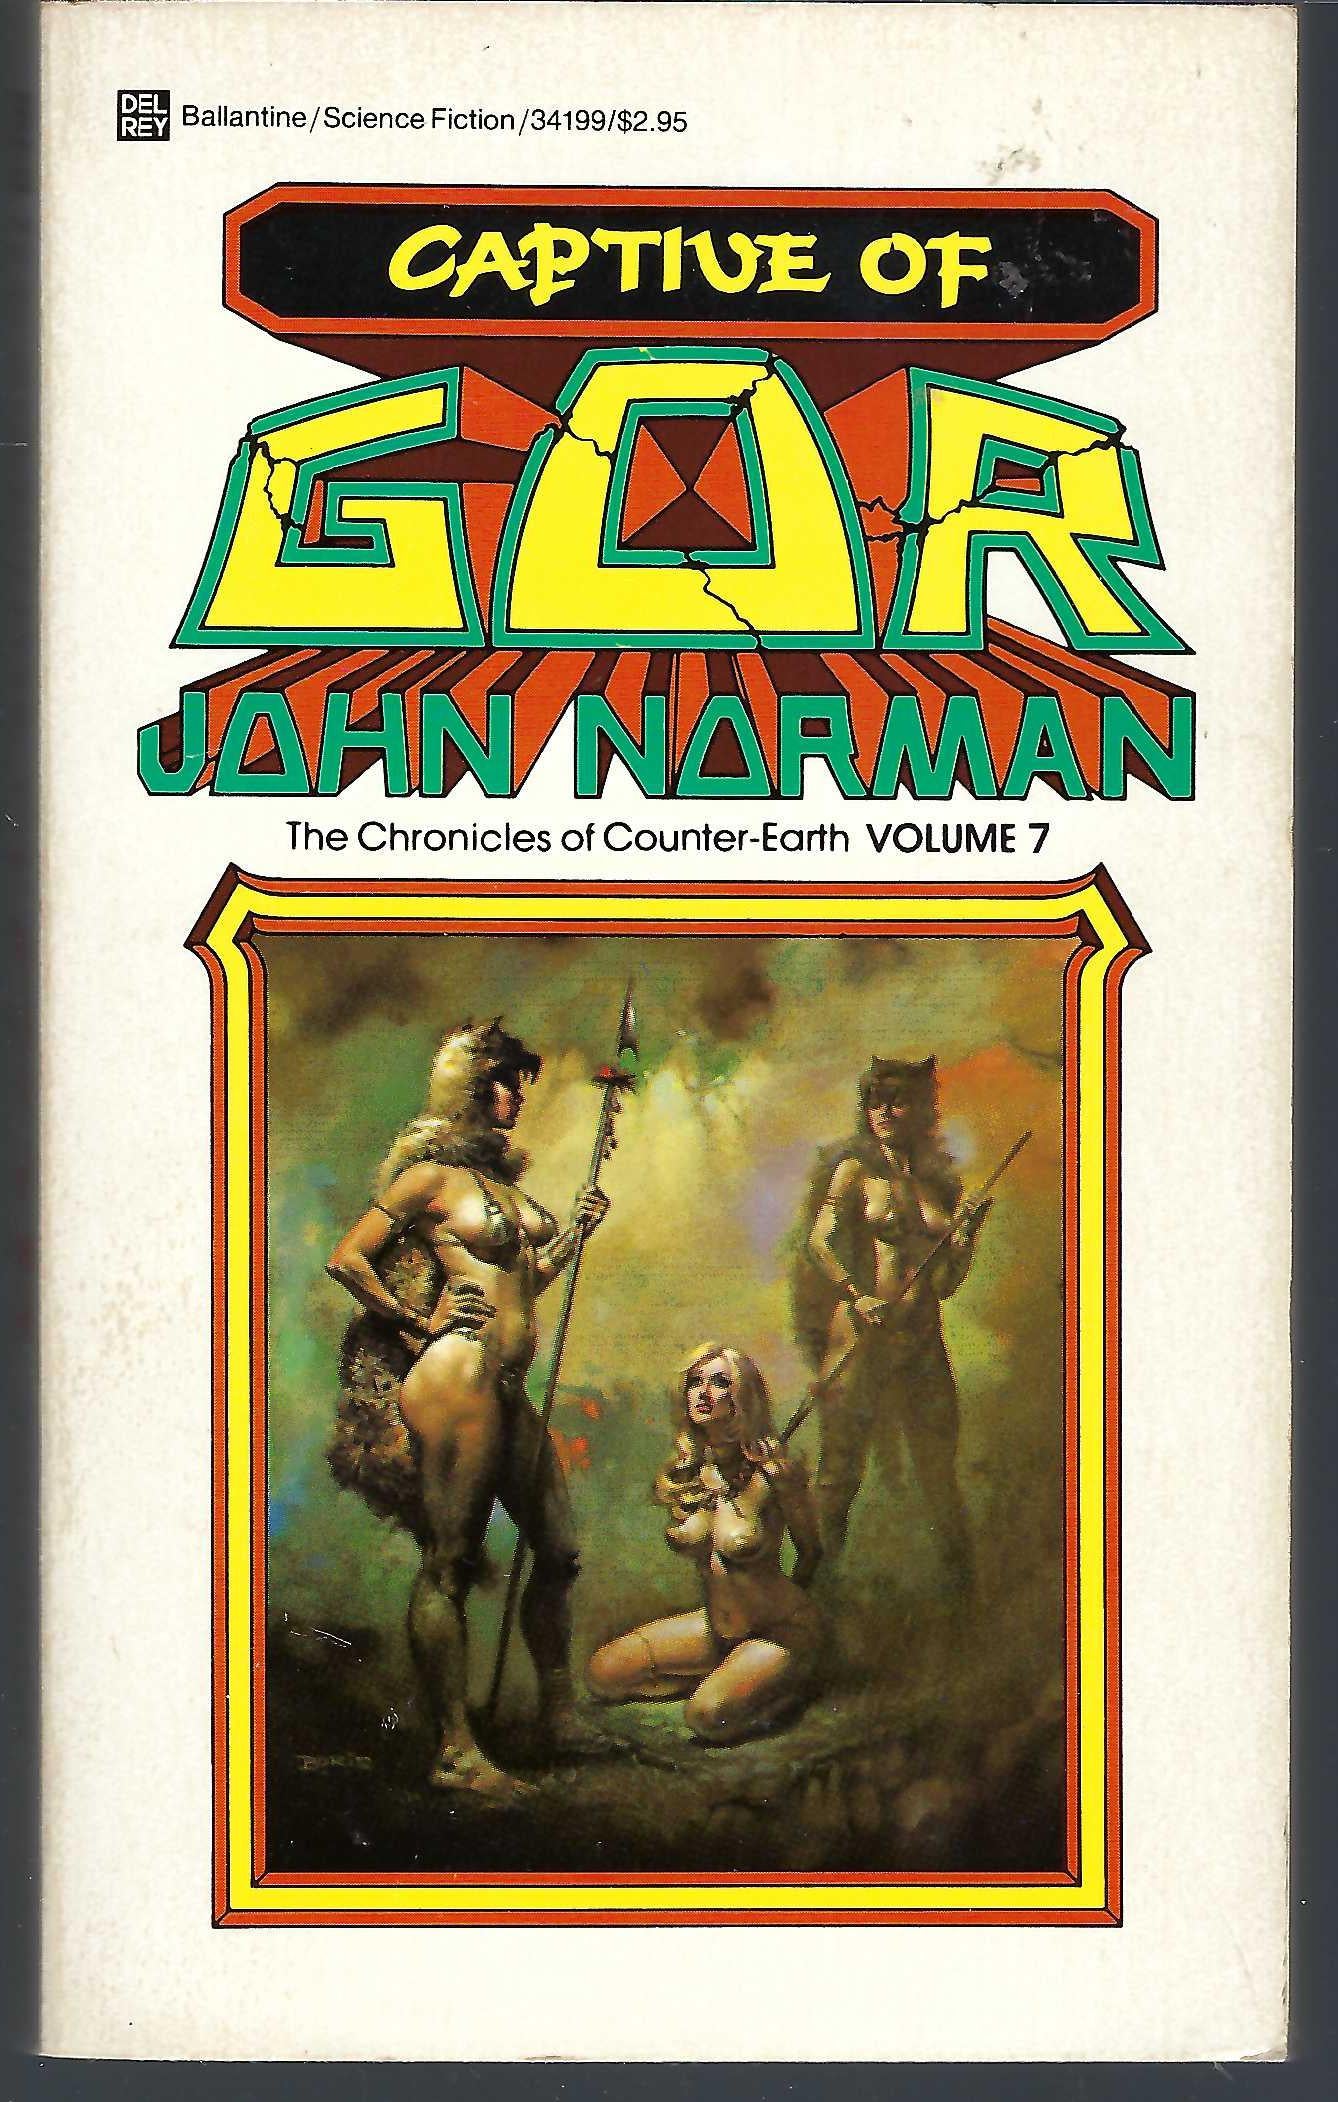 Captive of Gor by John Norman cover